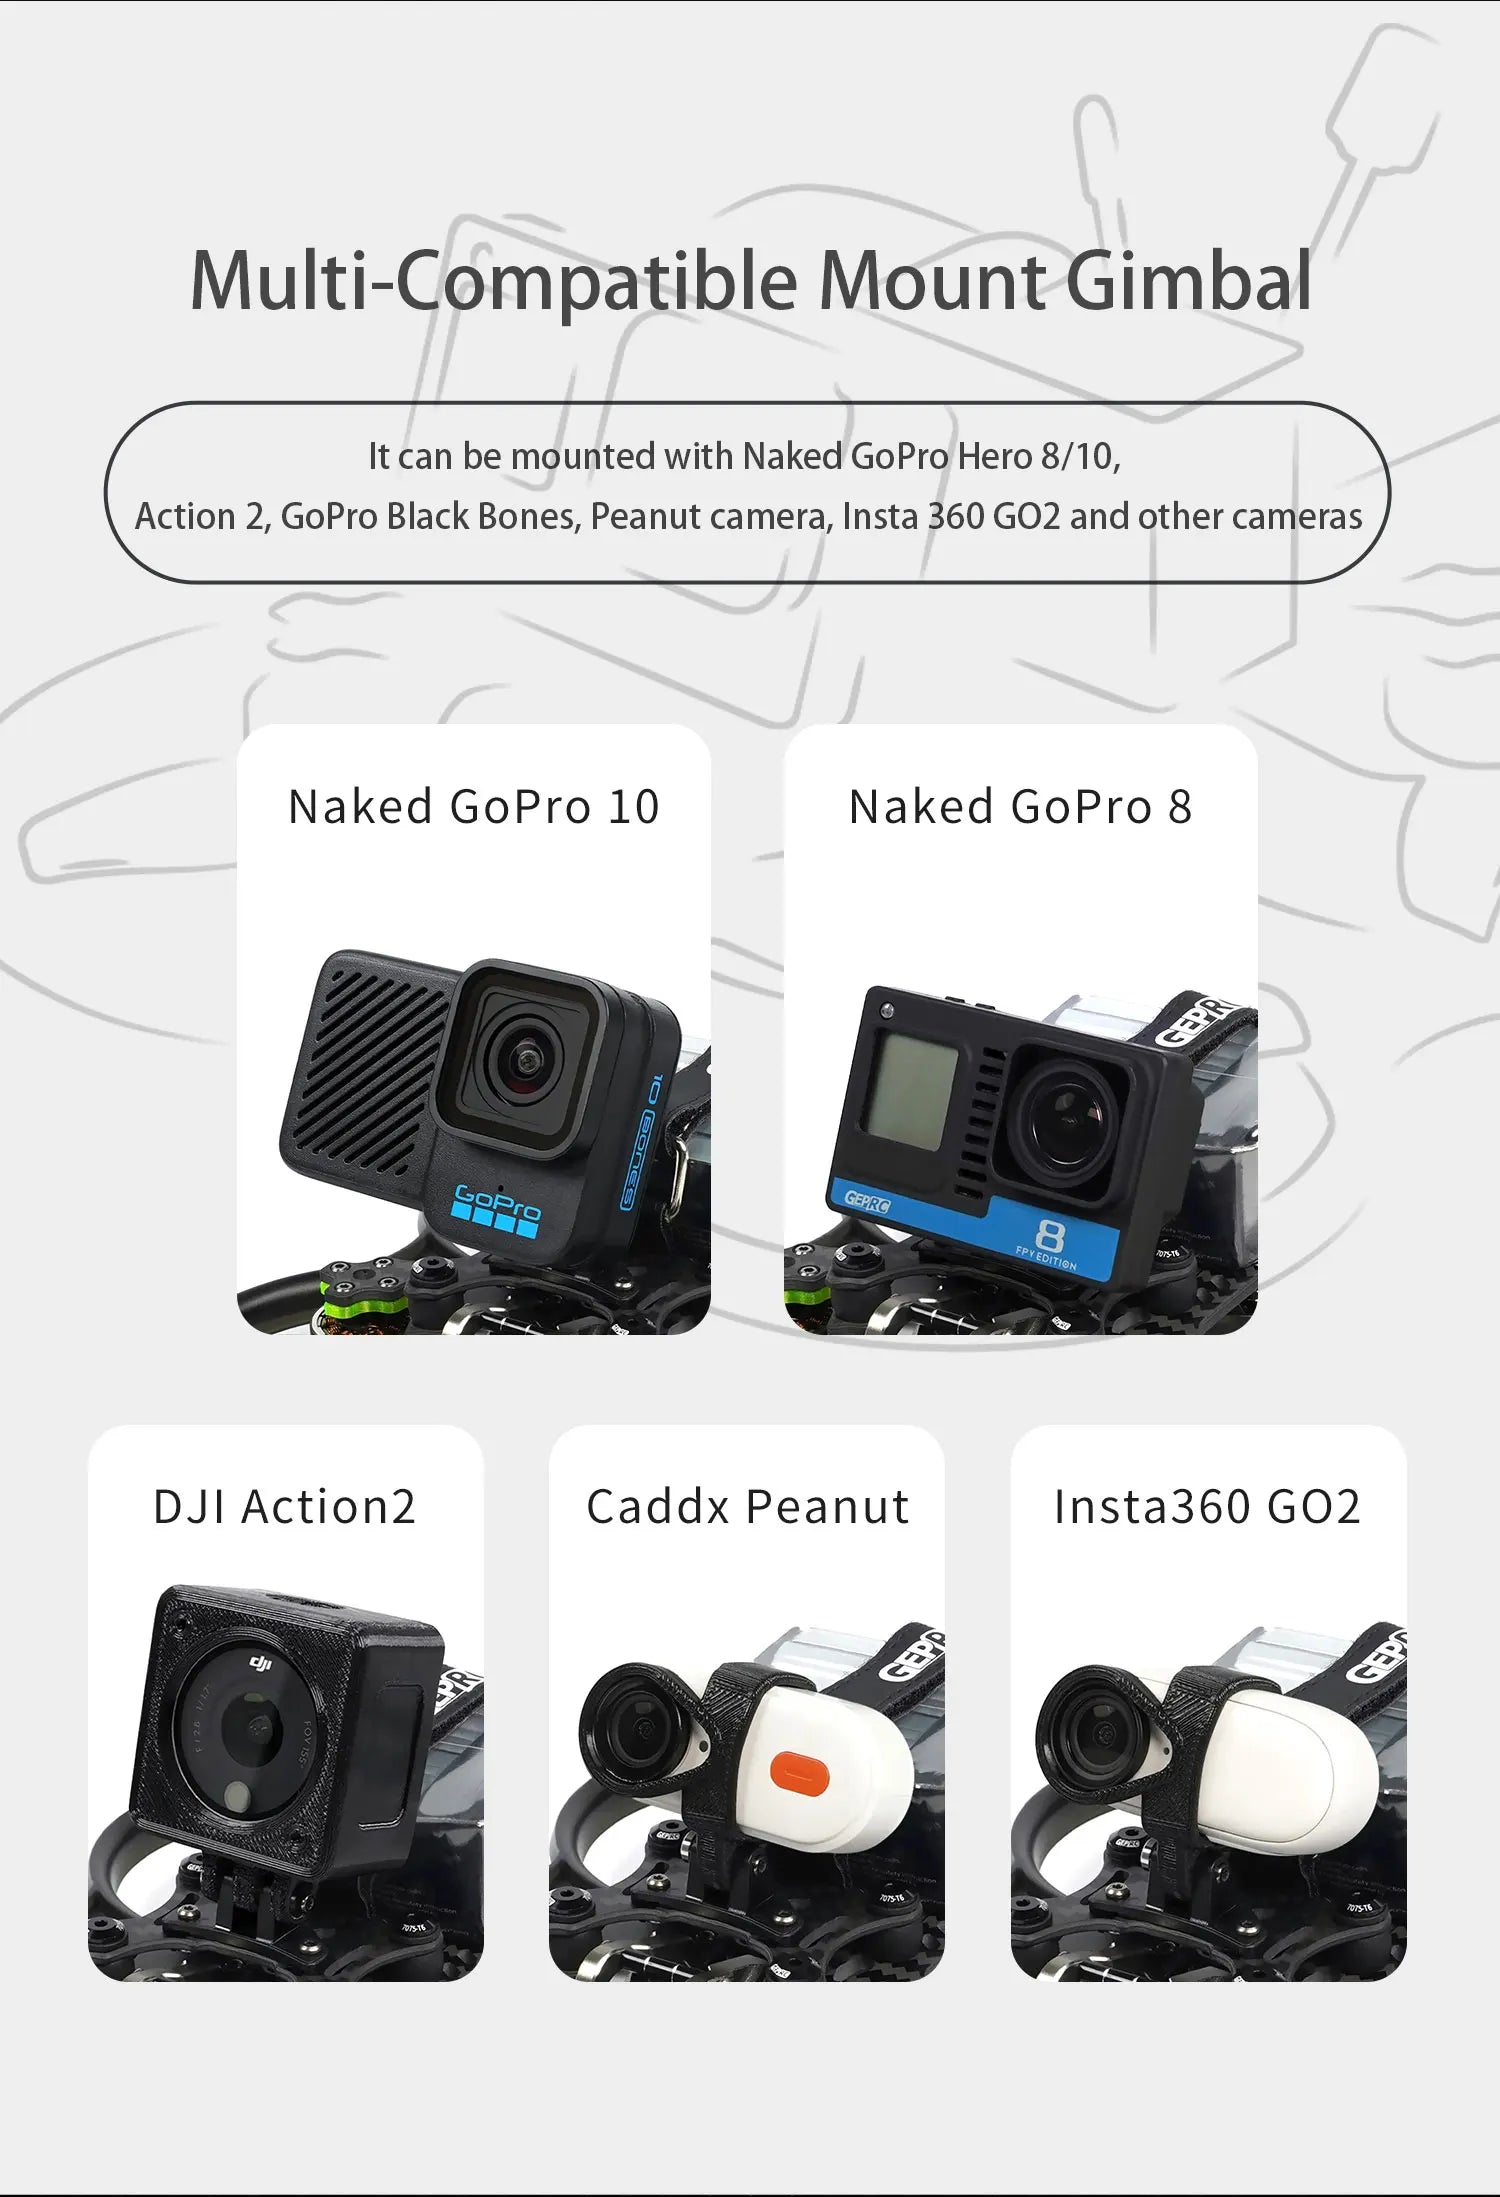 GEPRC Cinebot30 FPV Drone, Mount Gimbal can be mounted with Naked GoPro Hero 8/10, Action 2, Go